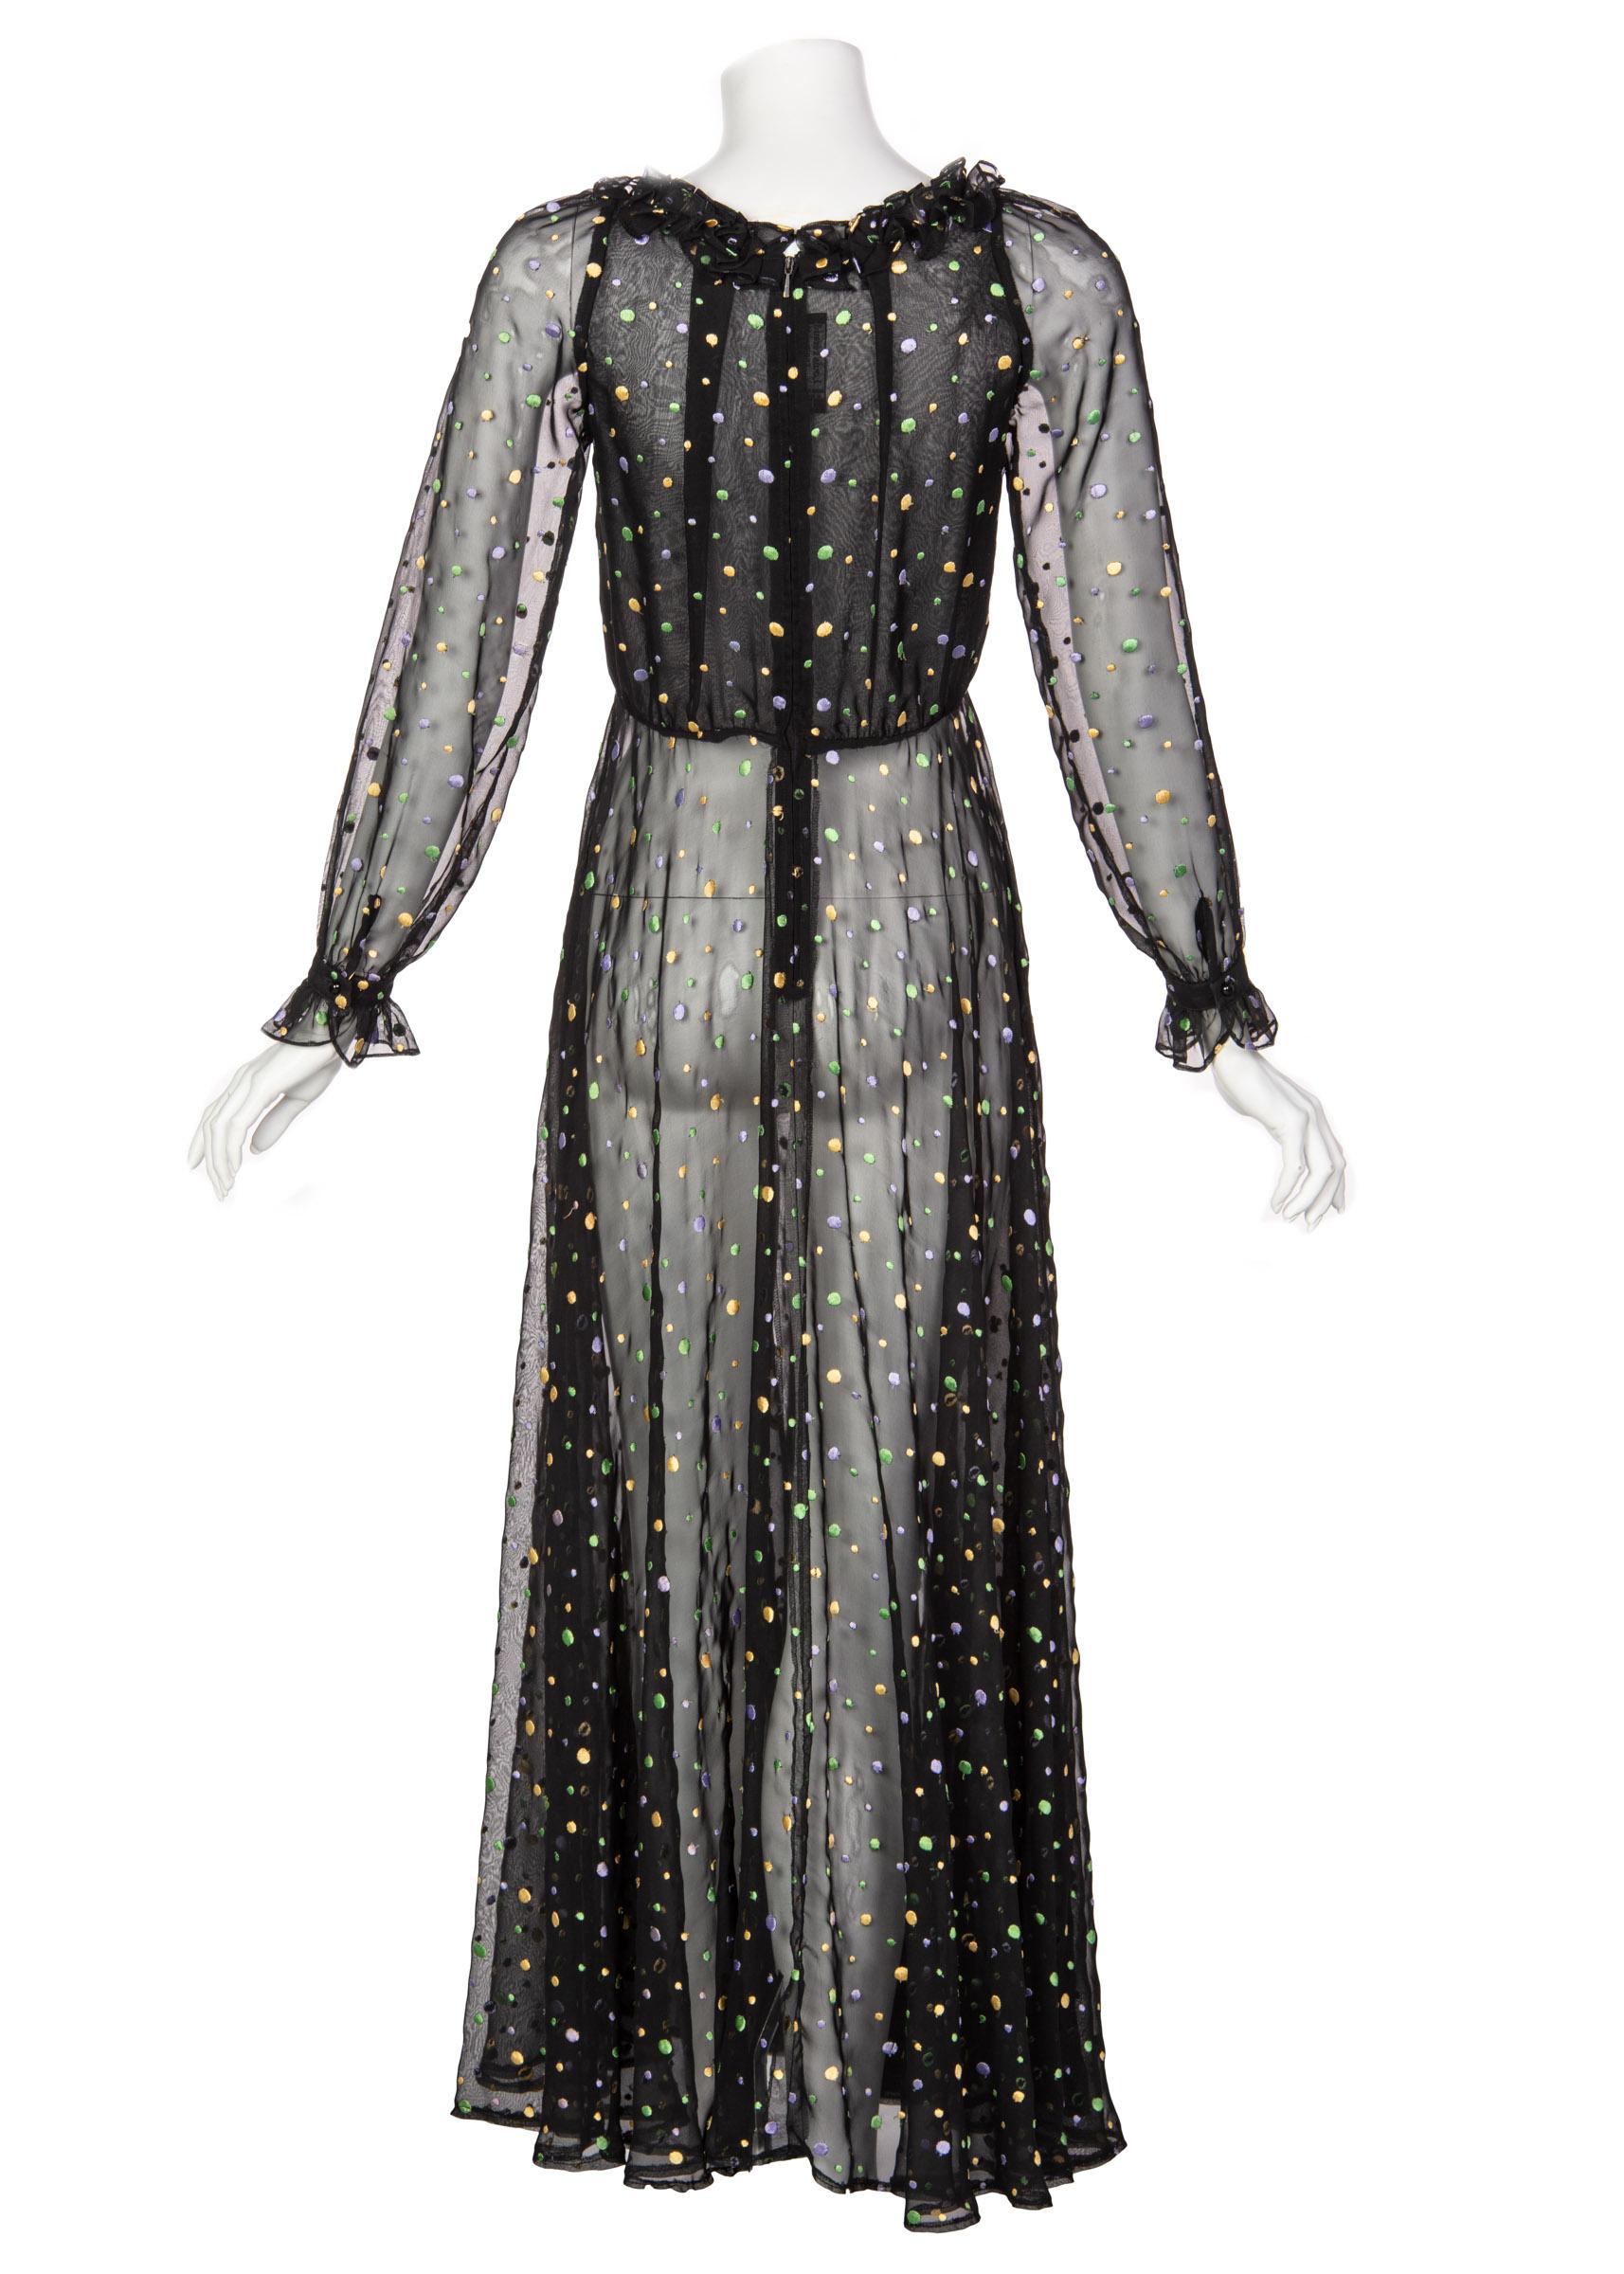 Women's Louis Feraud Vintage Sheer Embroidered Dot Dress, 1970s  